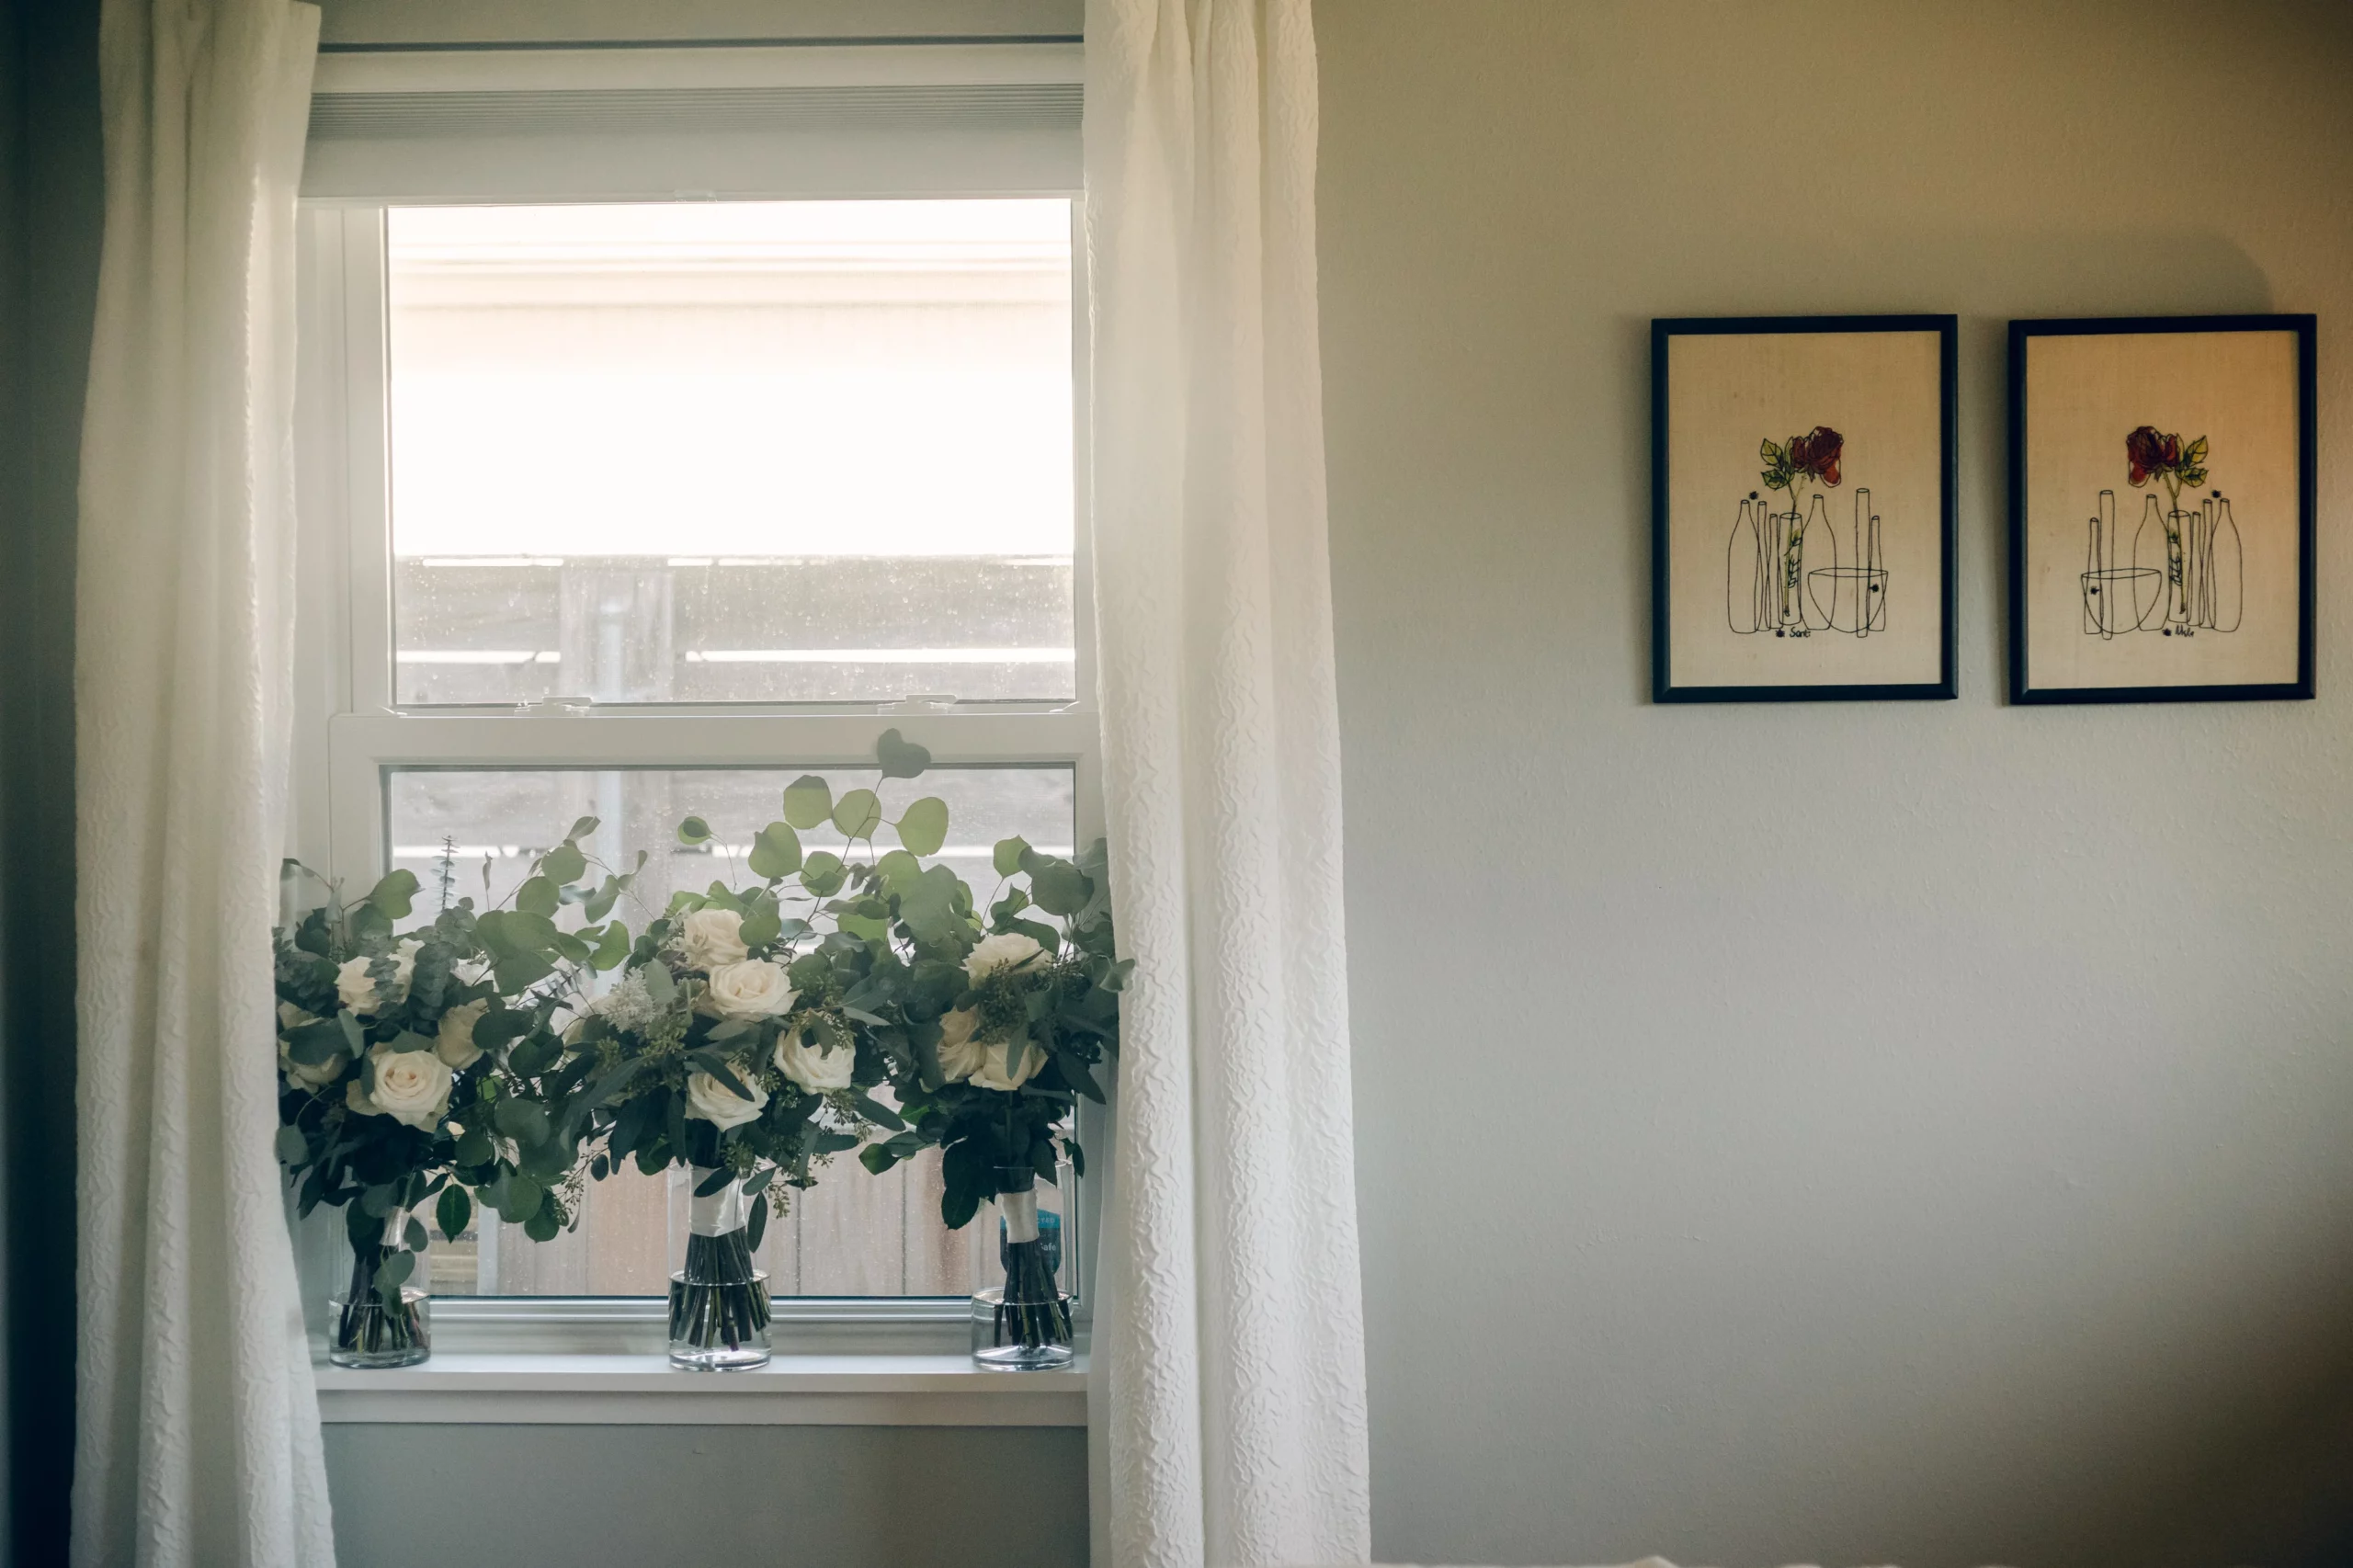 a detail image of three vases full of white and green bouquets sitting in a window